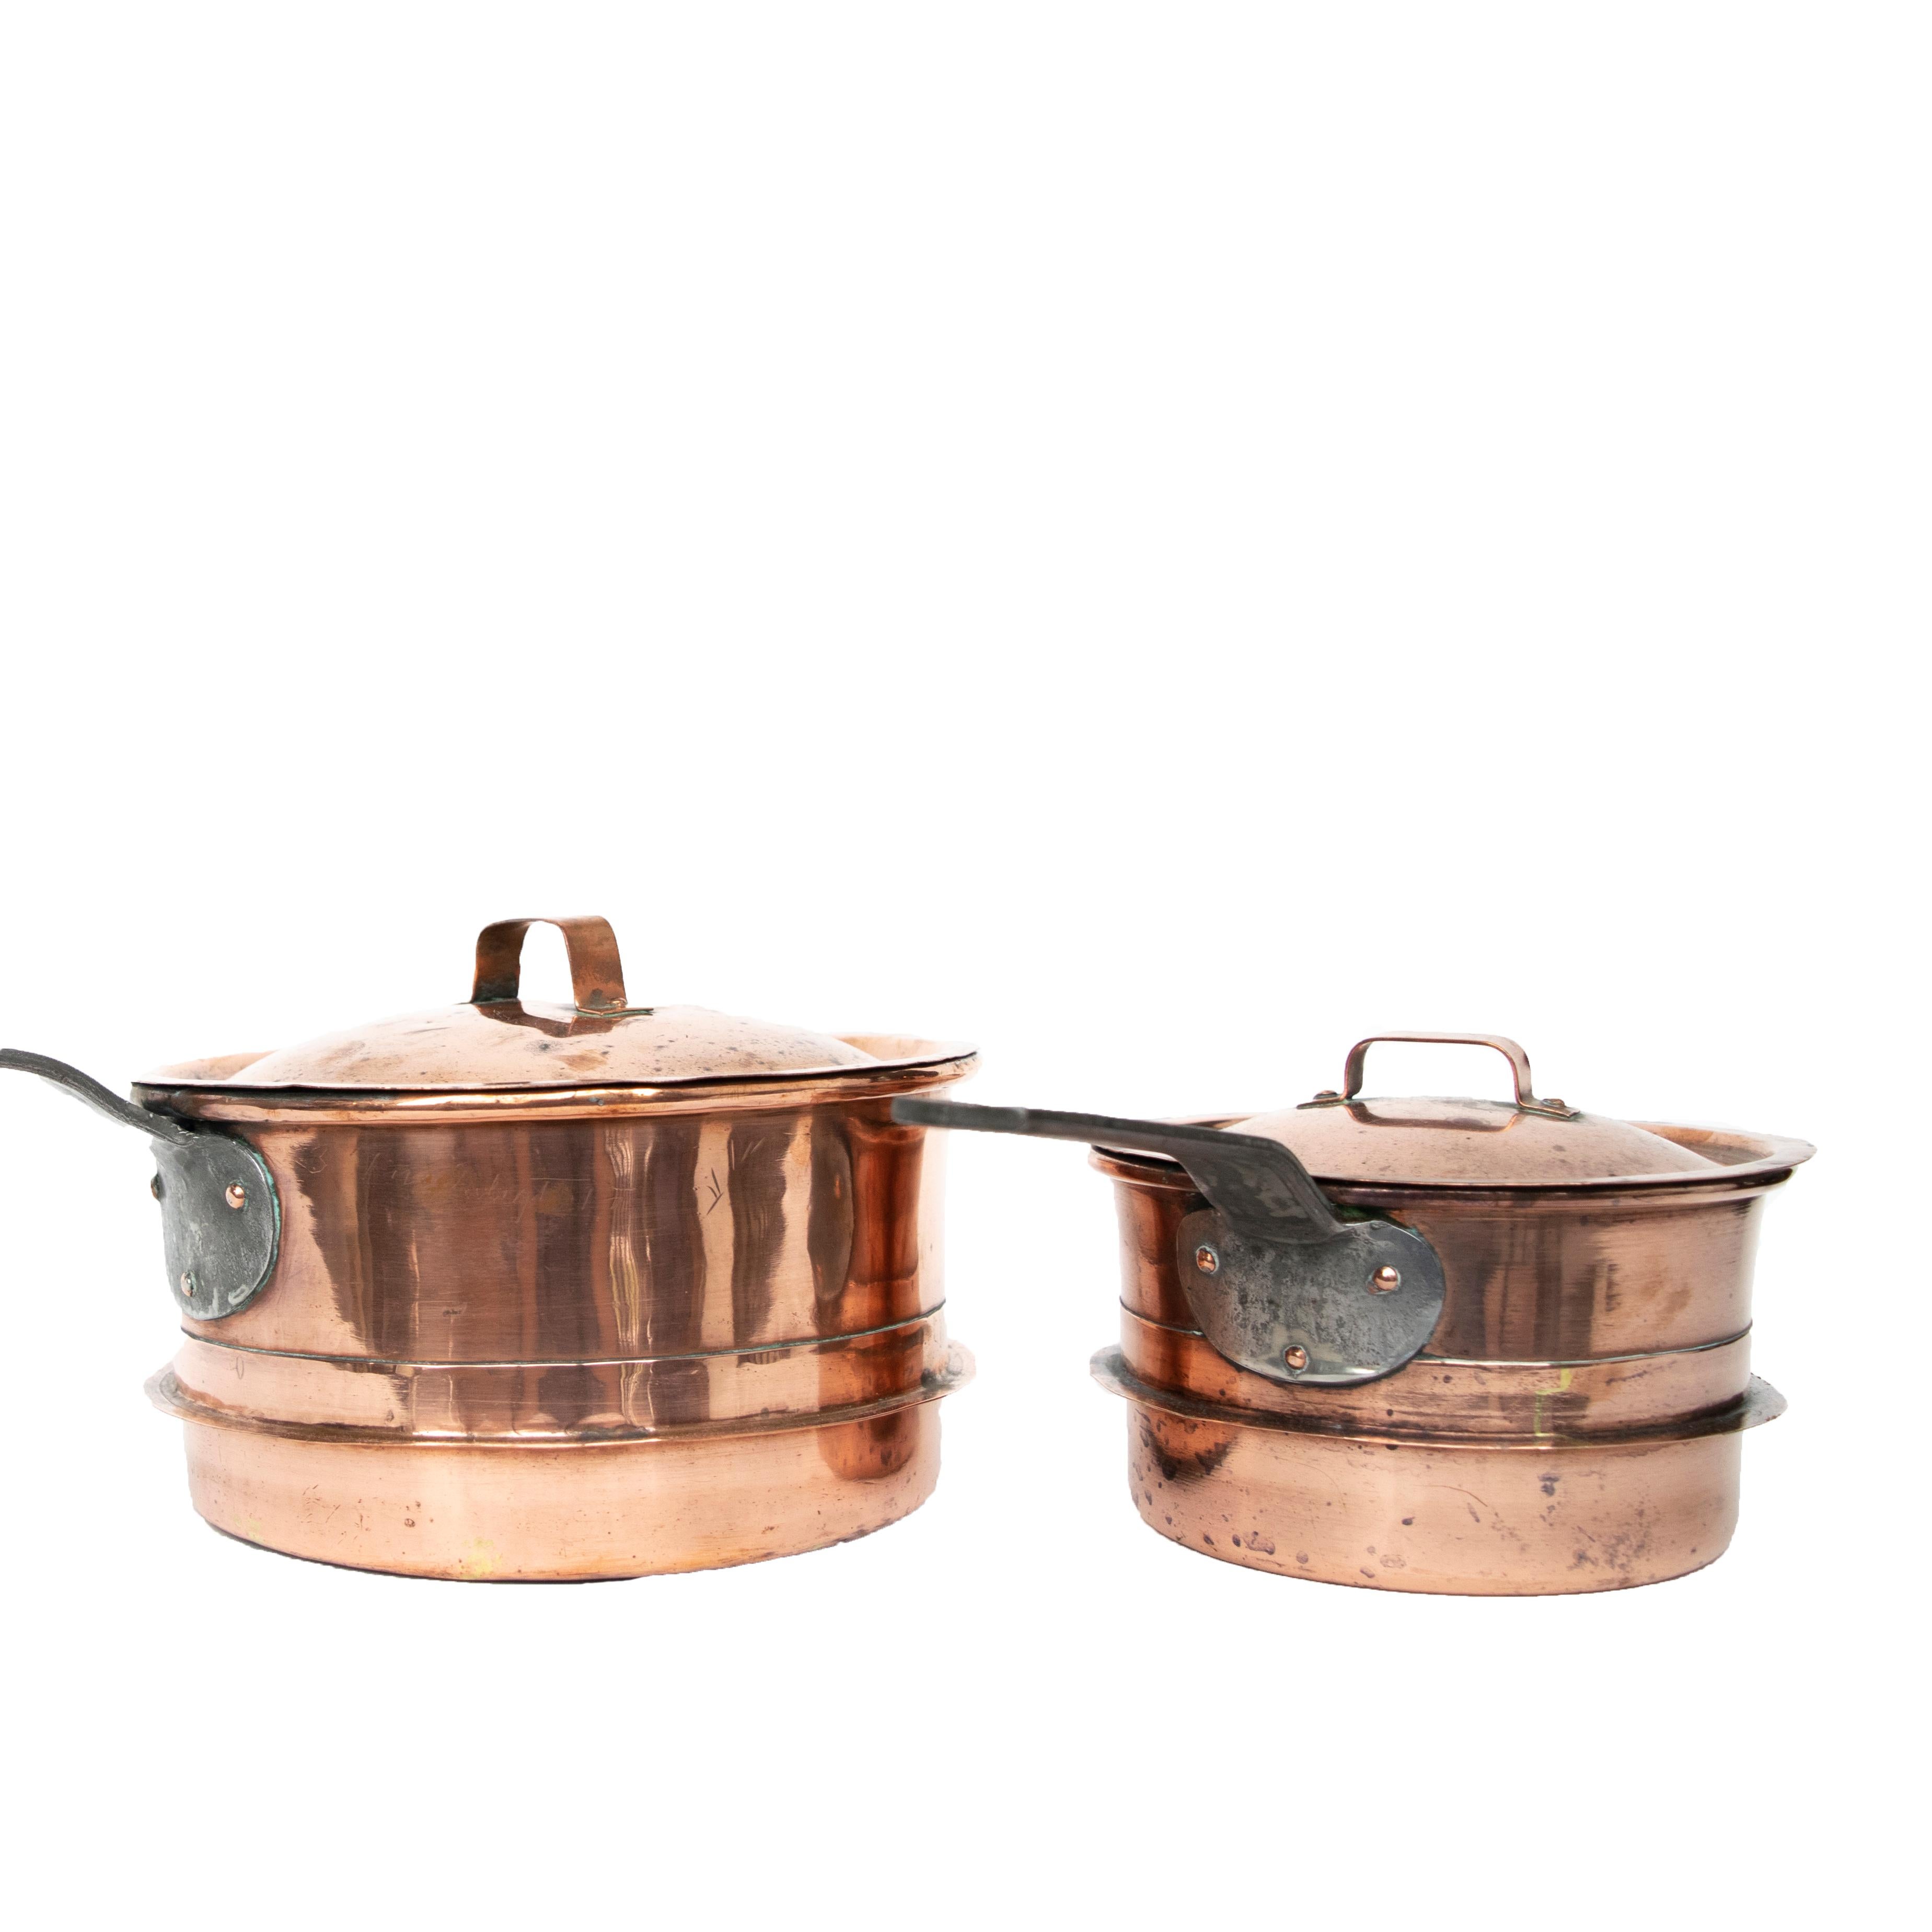 19th Century Antique Copper Saucepan with Cast Iron Handle, Small Size from Sweden Late 1800 For Sale